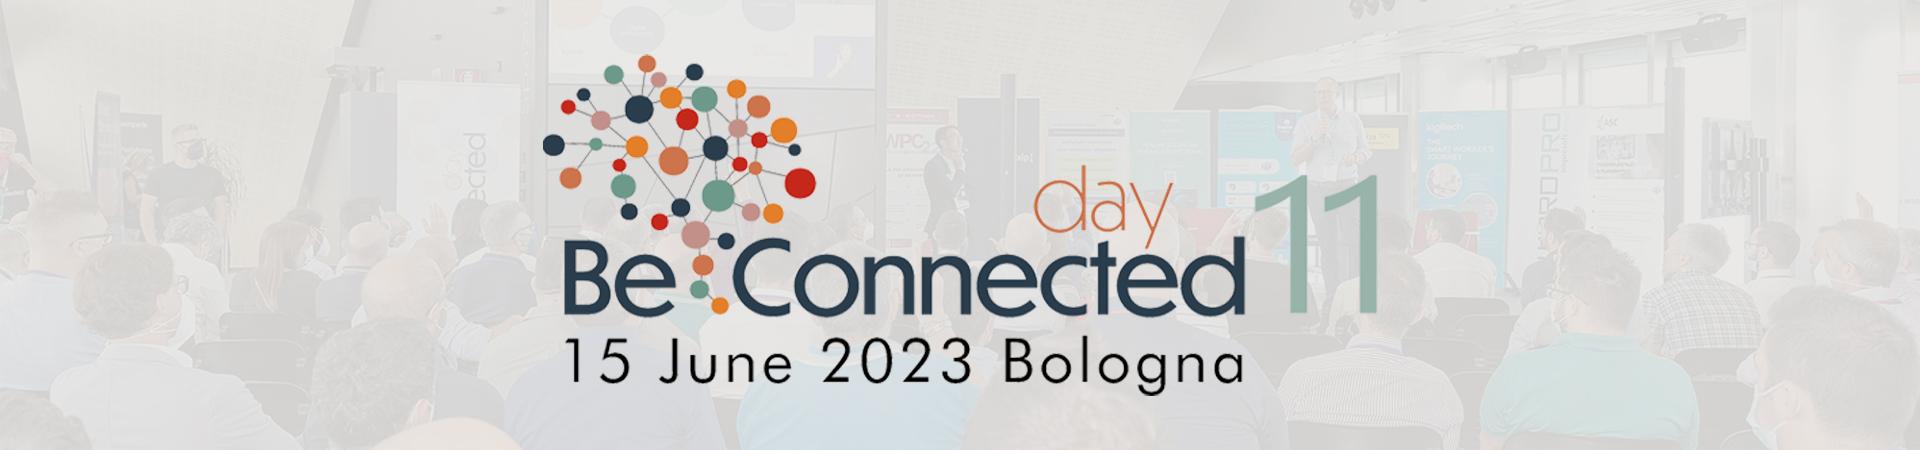 Be Connected Day | Mida Solutions | Bludis